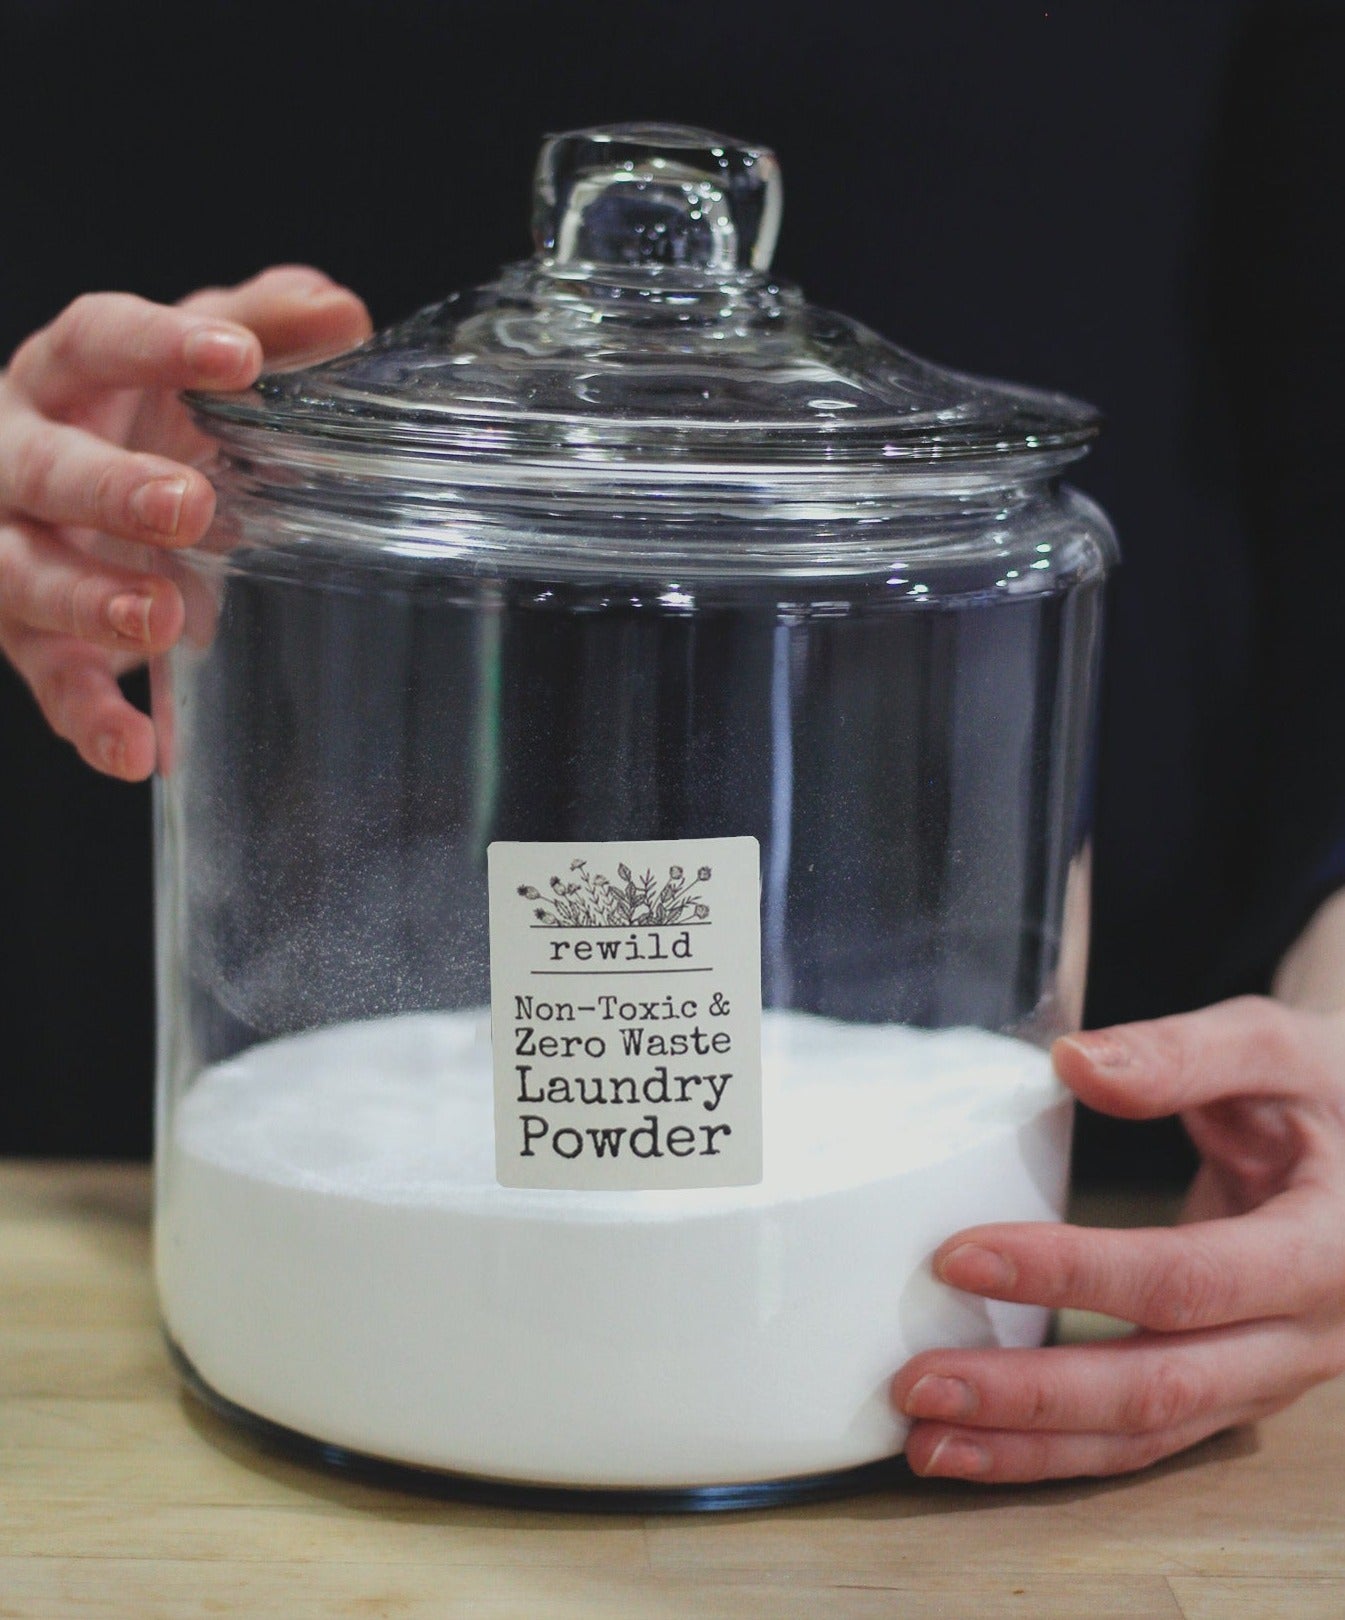 hands holding a large glass jar of laundry powder